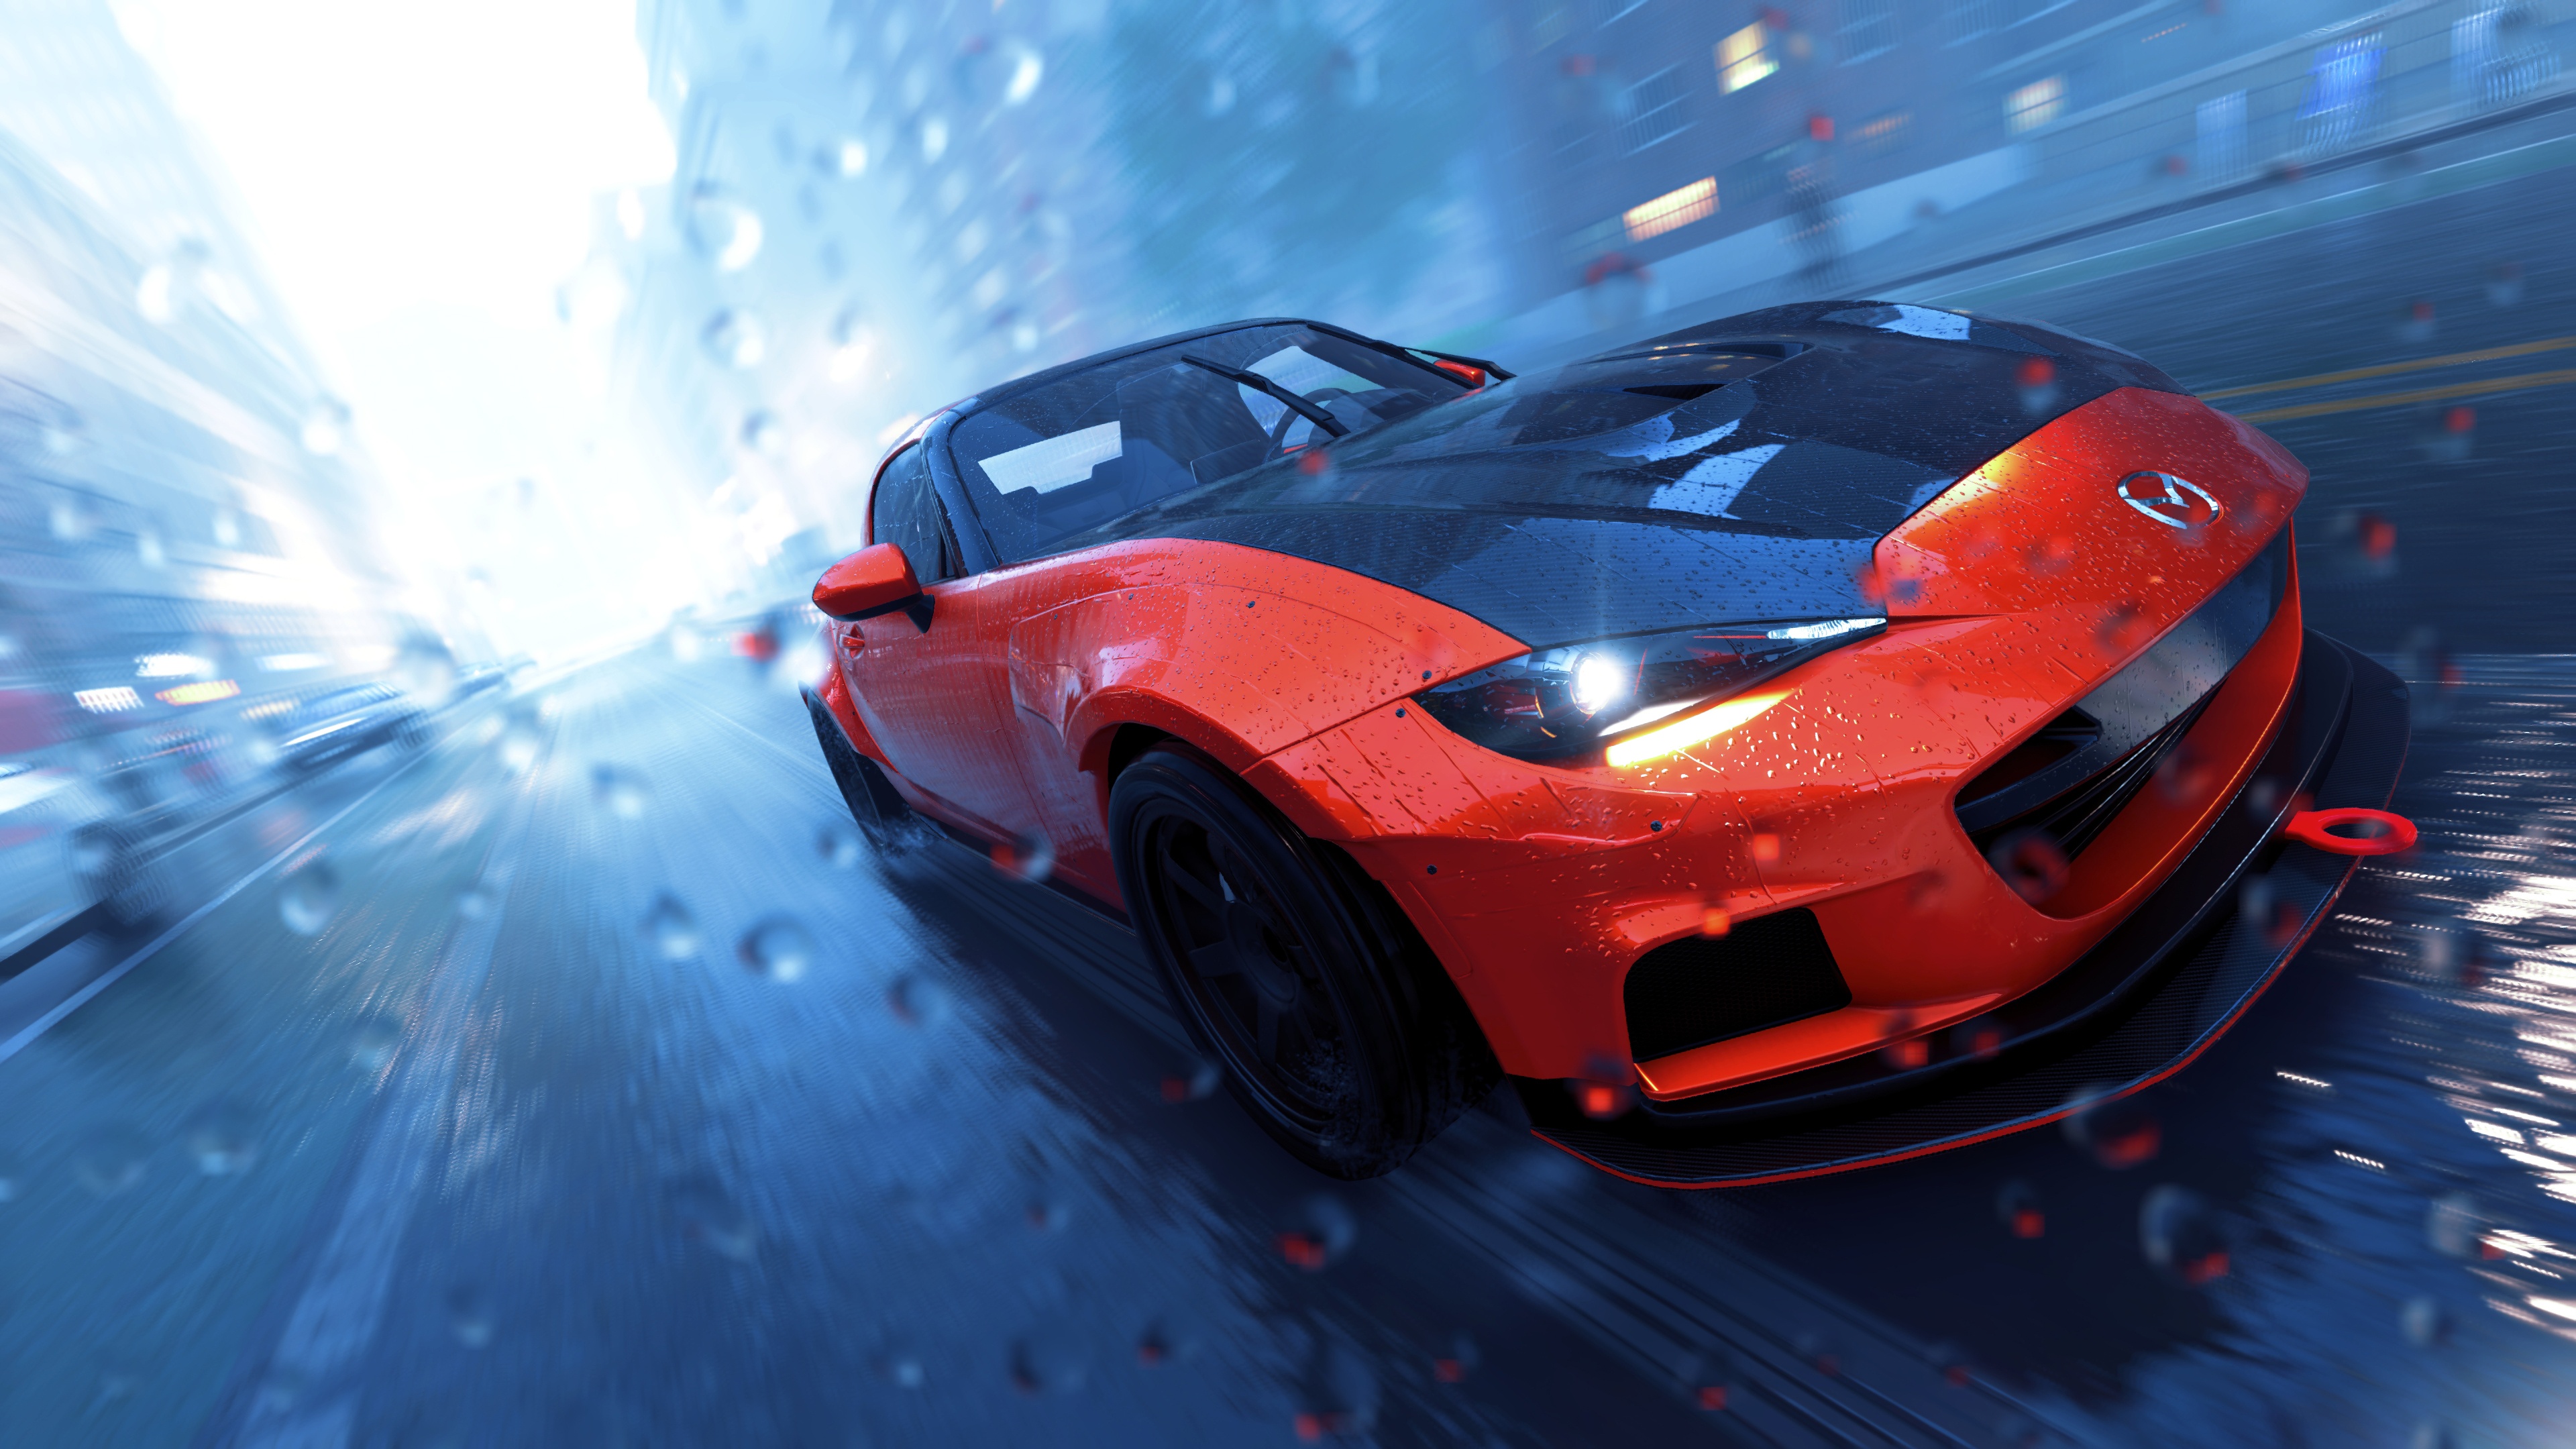 The Crew 2 Car Video Games The Crew Red Cars Blue Wallpaper Resolution 3840x2160 Id 674326 Wallha Com Find the best red and blue background on wallpapertag. car video games the crew red cars blue